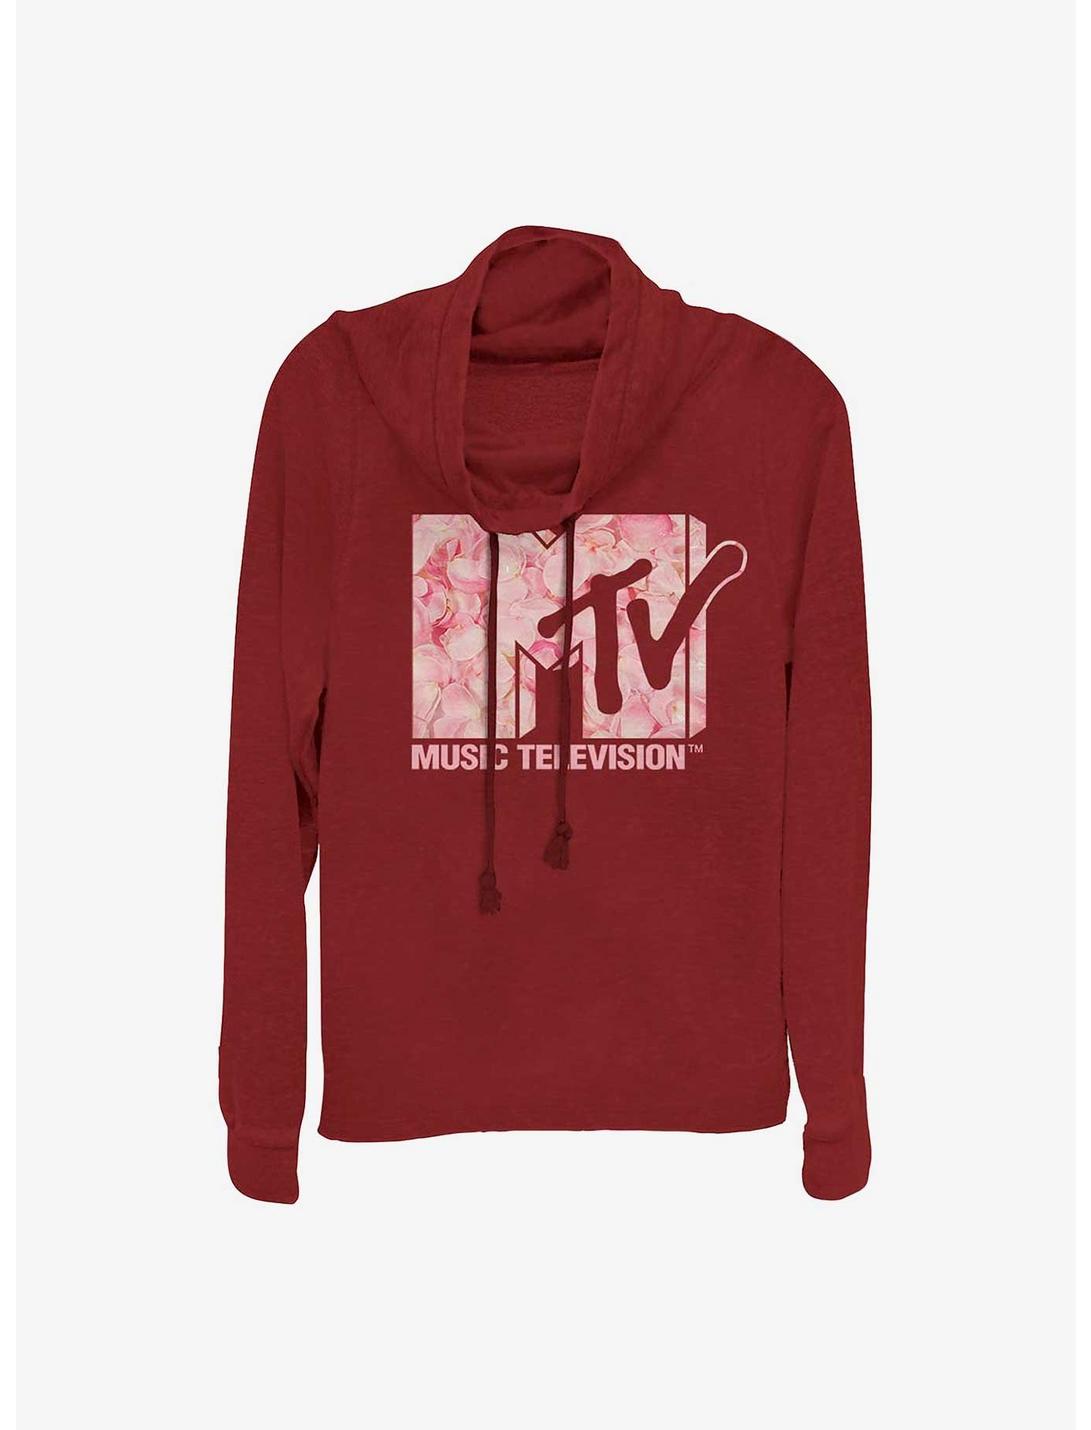 MTV Roses Are Pink Girls Cowl Neck Long Sleeve Top, SCARLET, hi-res